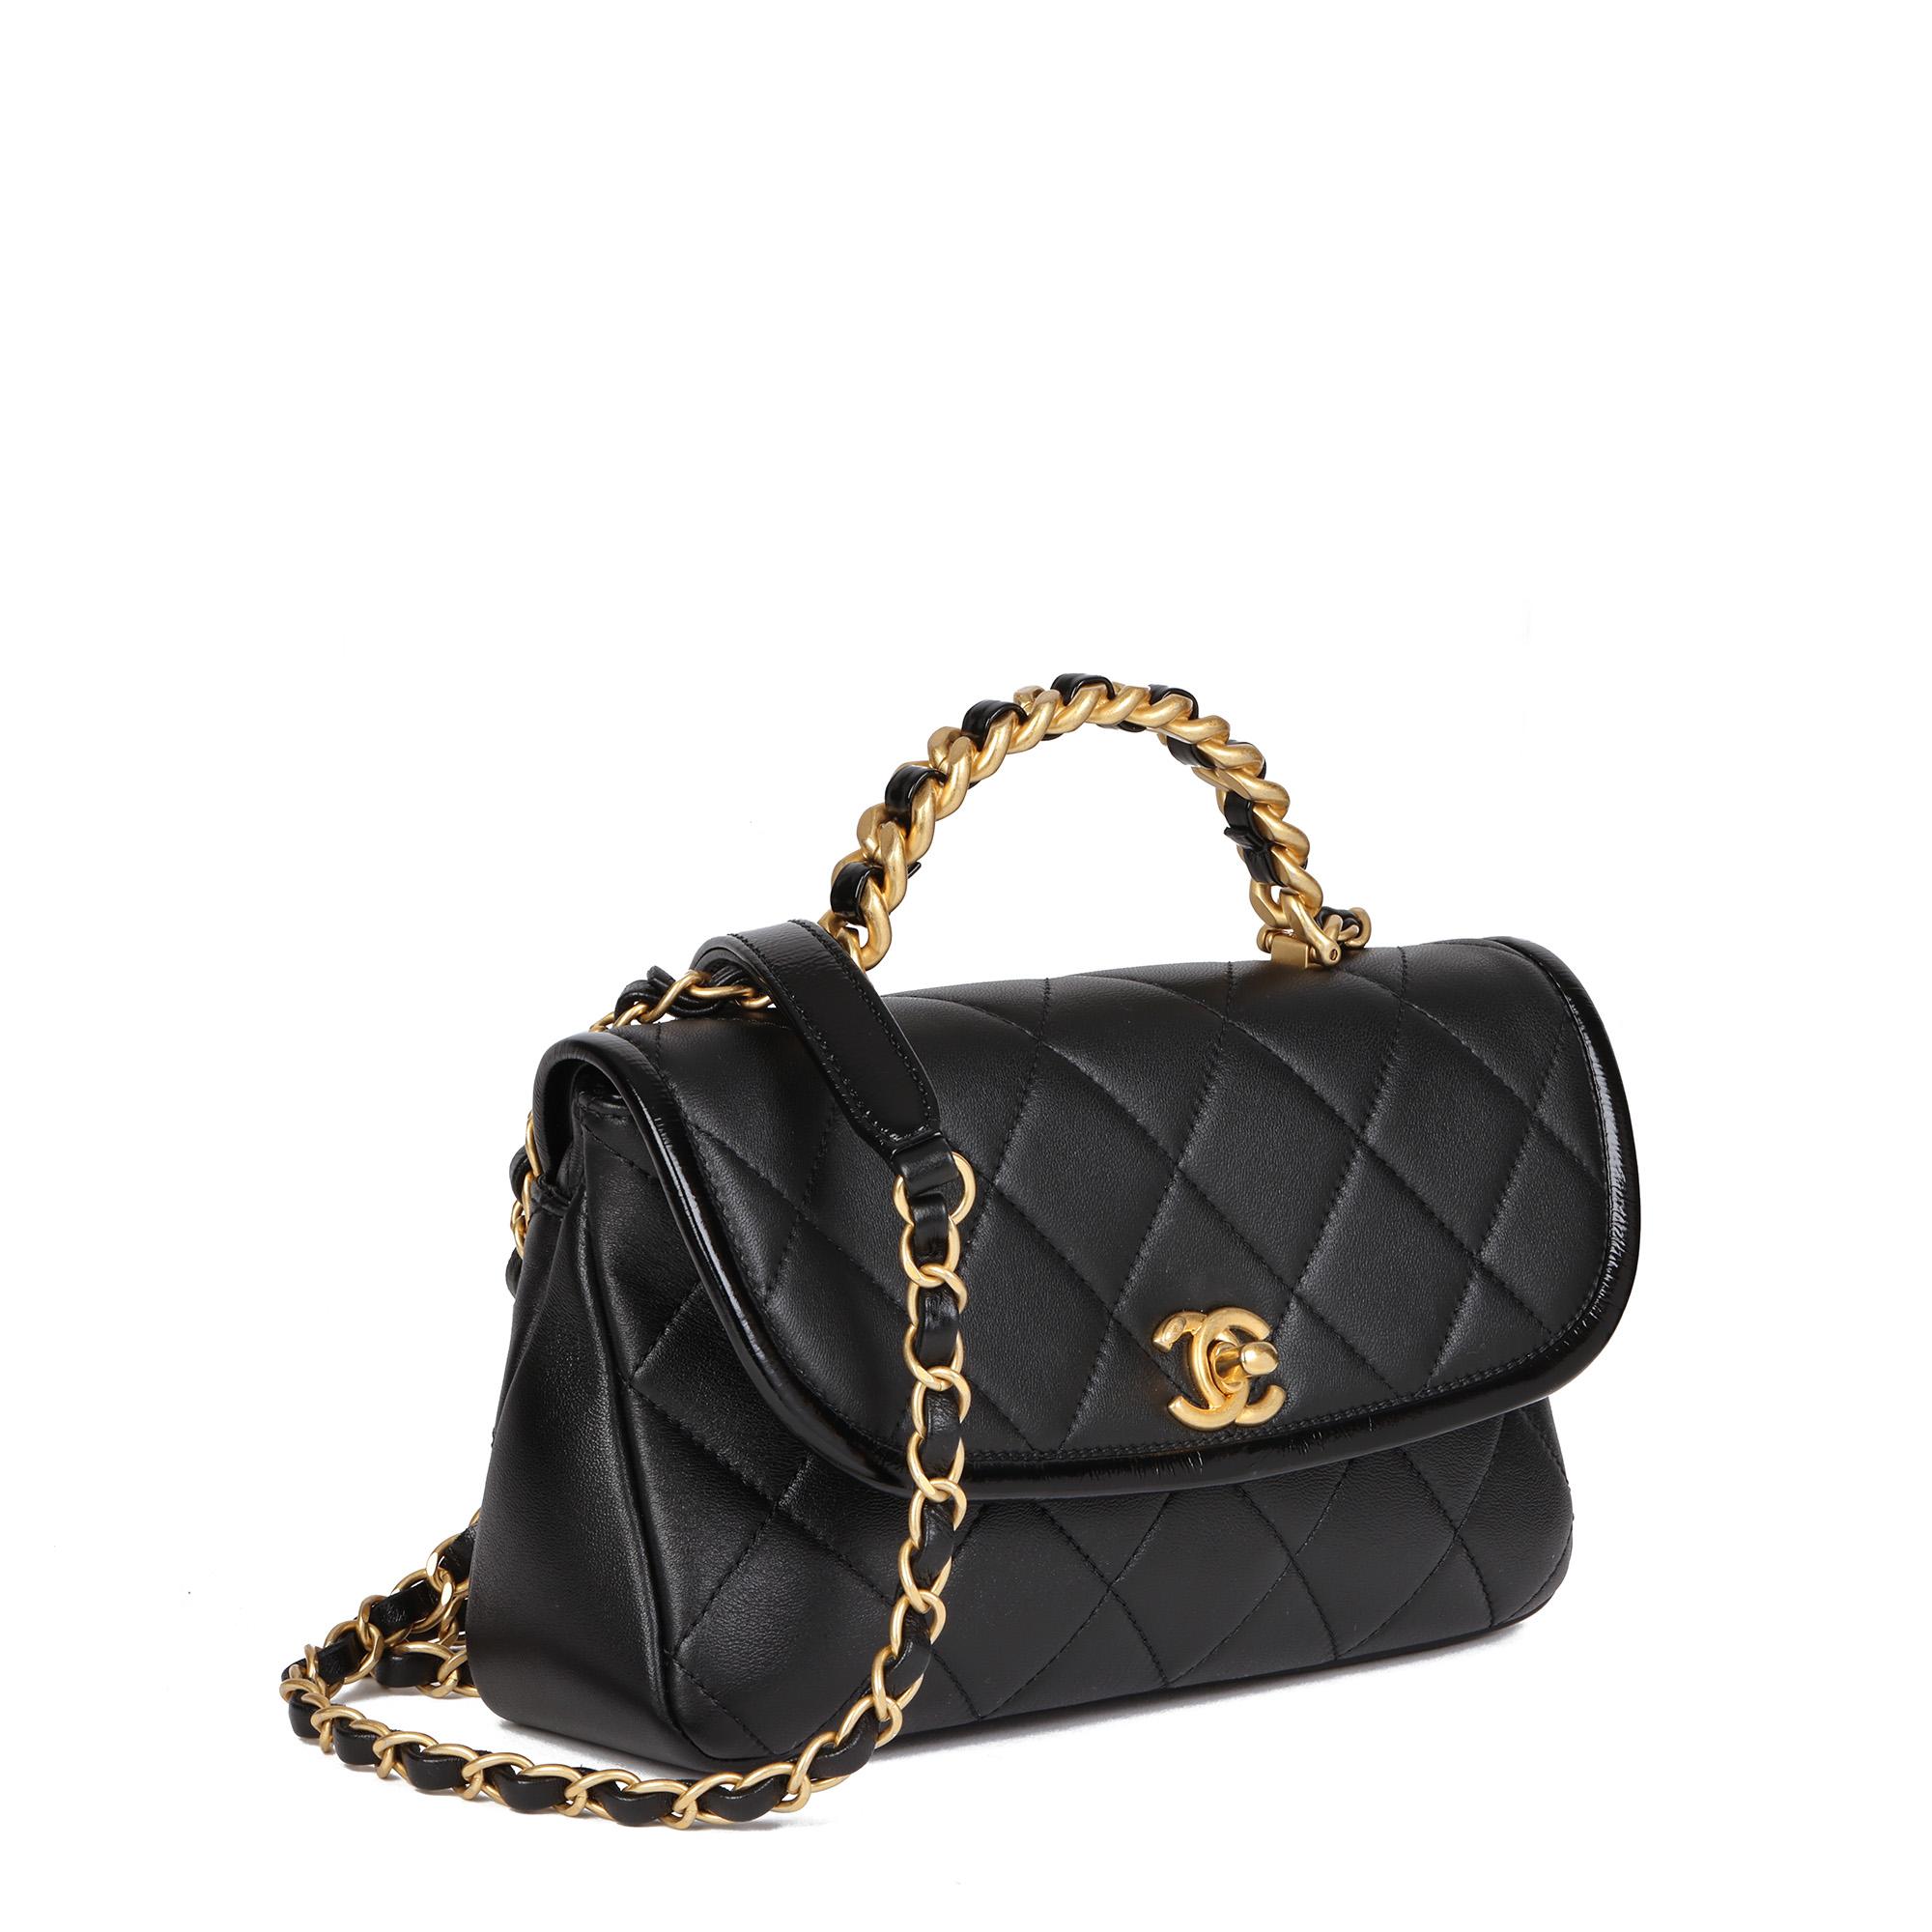 CHANEL
Black Quilted Lambskin Small Classic Top Handle Flap Bag

Xupes Reference: HB4548
Serial Number: 30991409
Age (Circa): 2020
Accompanied By: Chanel Dust Bag, Box, Authenticity Card, Care Booklet, Protective Felt
Authenticity Details: